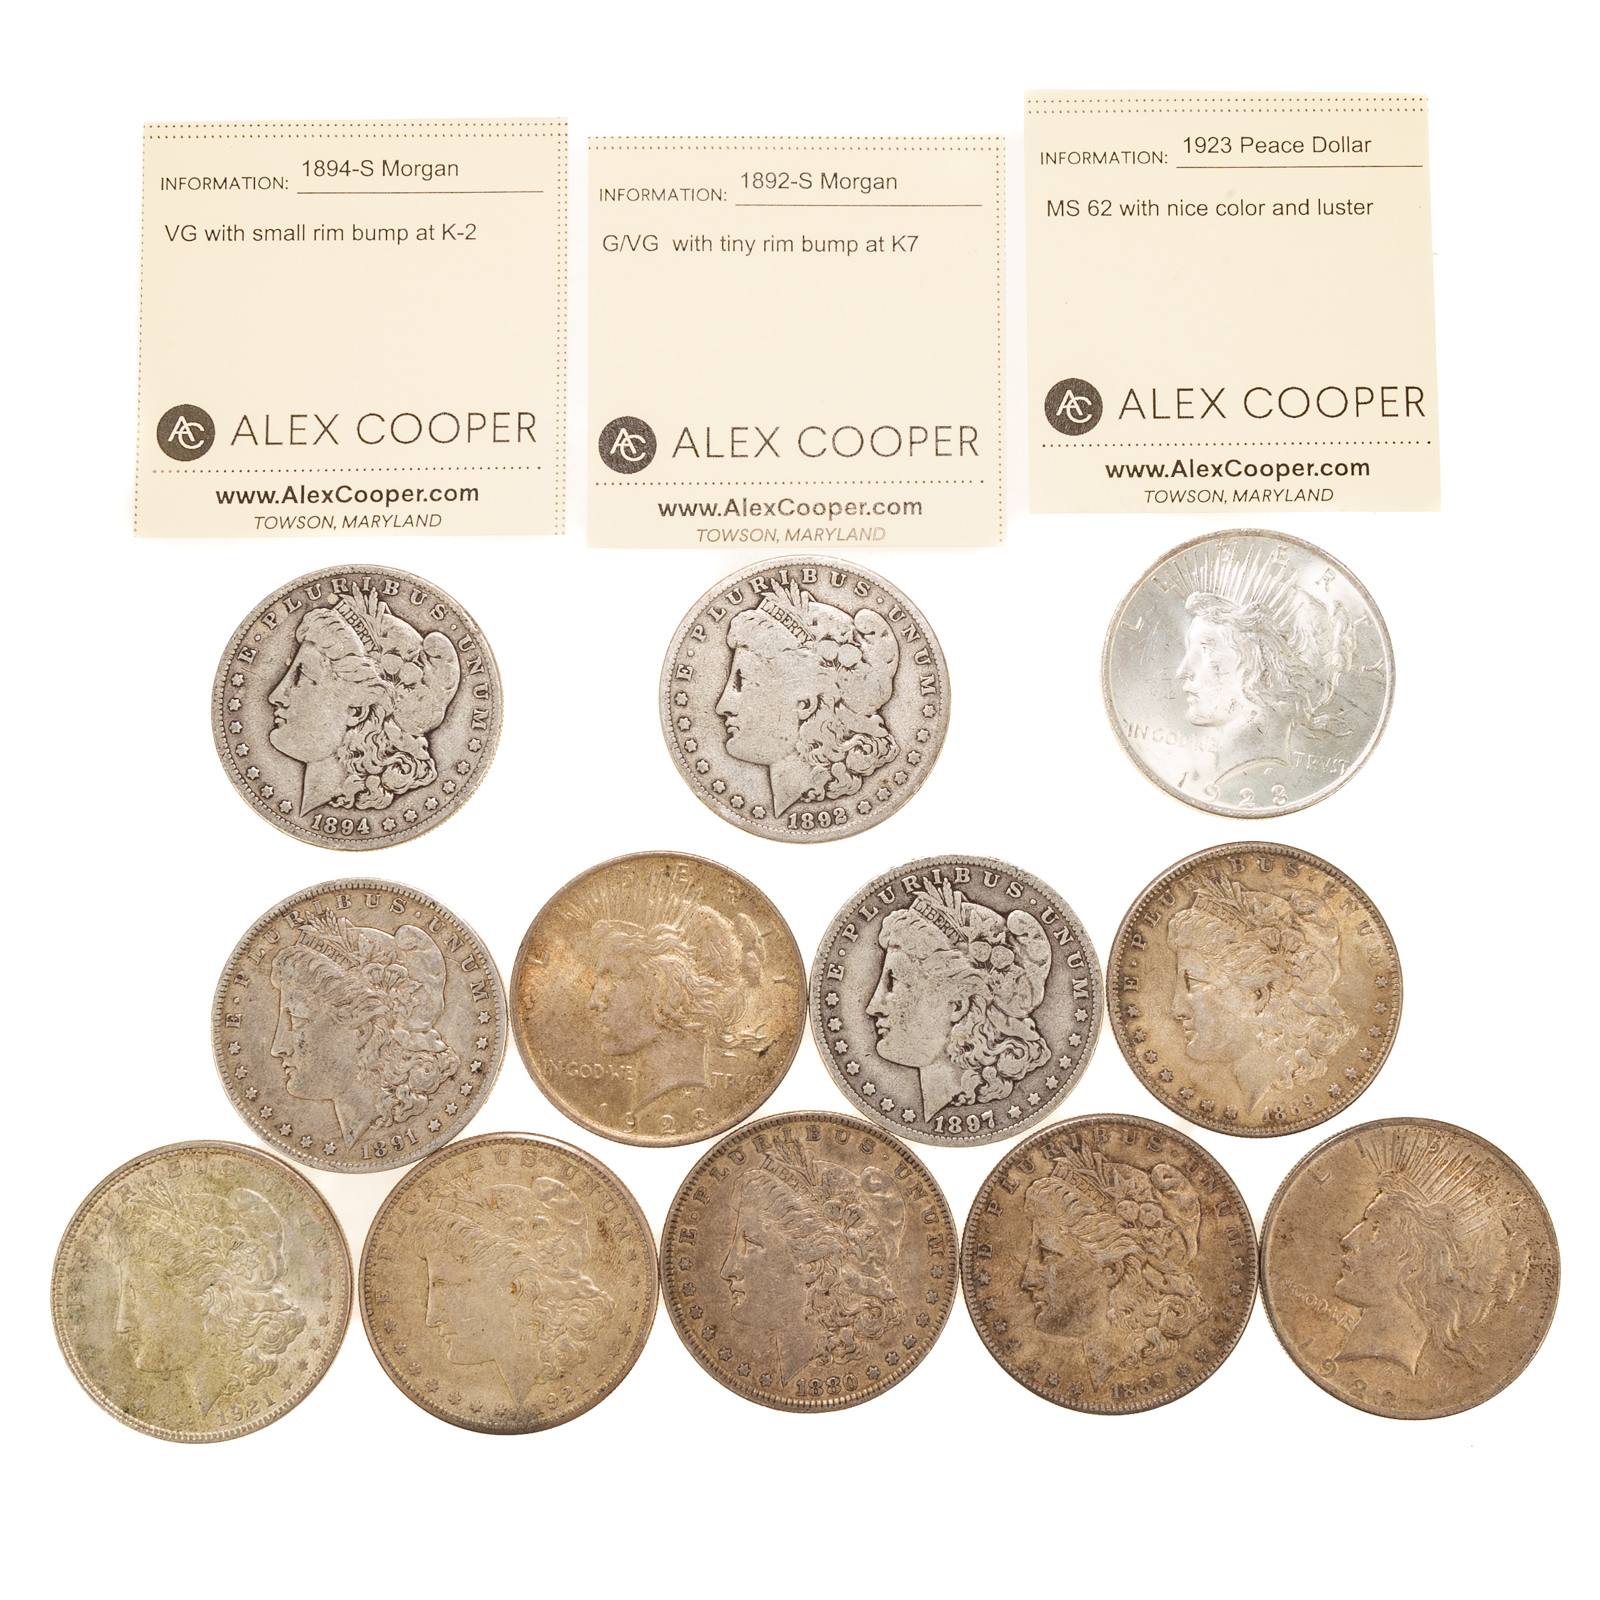 A DOZEN SILVER DOLLARS WITH 1892-S